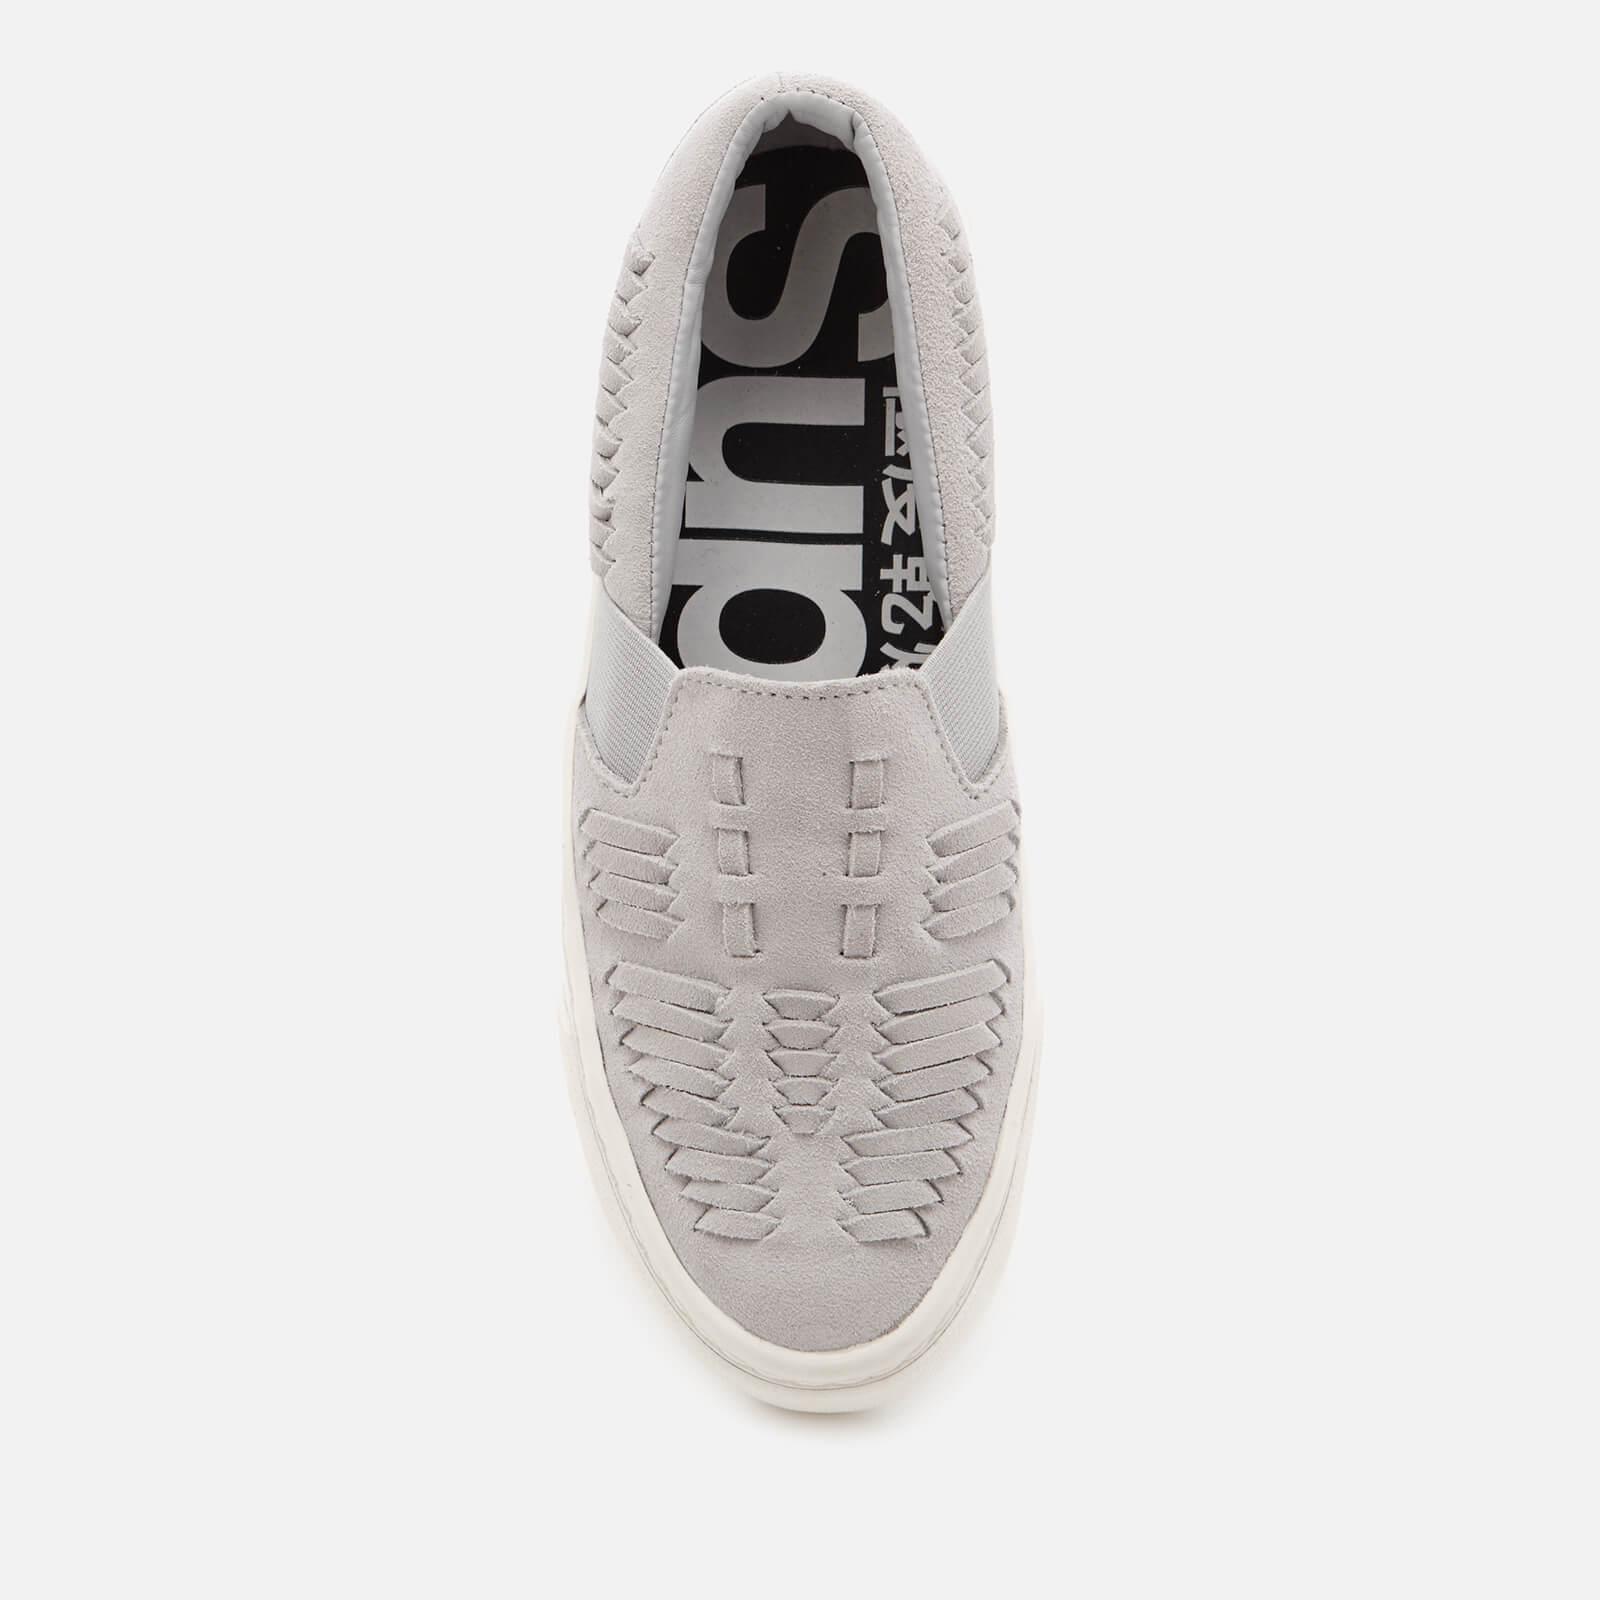 Superdry Suede Dion Luxe Slip-on Trainers in Grey (Grey) - Lyst